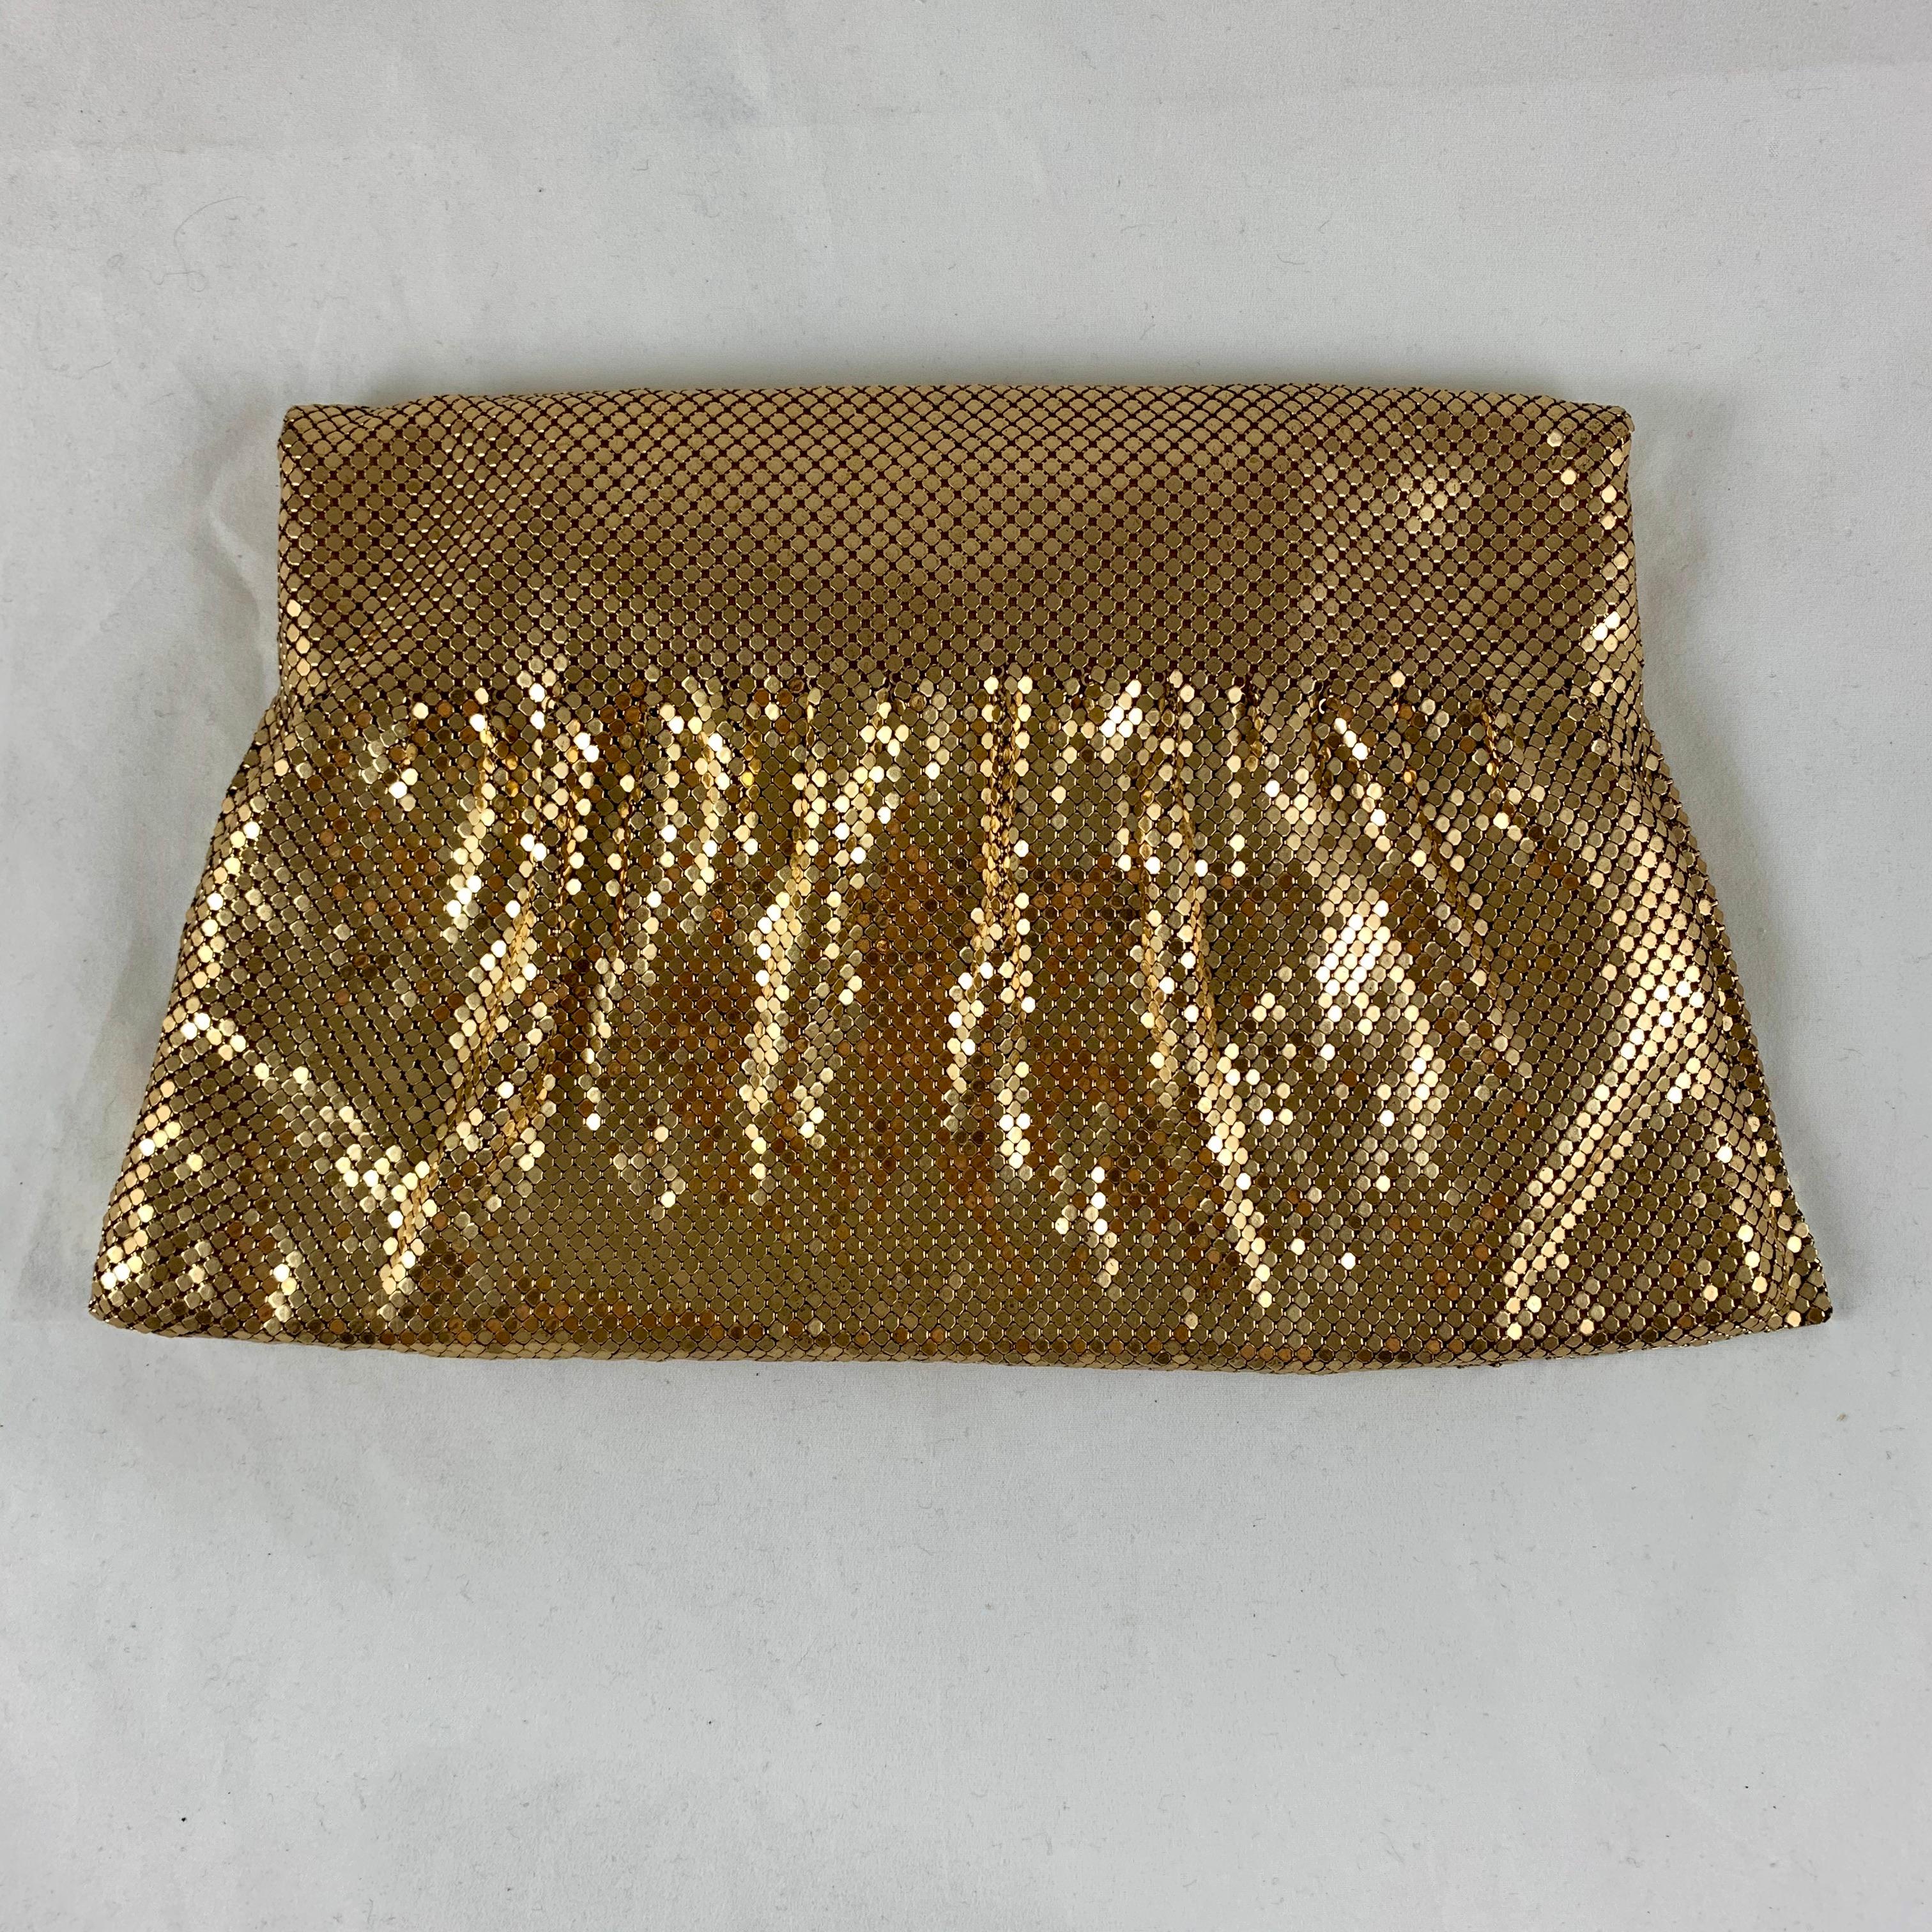 International Style 1950s Whiting and Davis Gold Mesh Jewel Closure Evening Clutch with Coin Purse For Sale